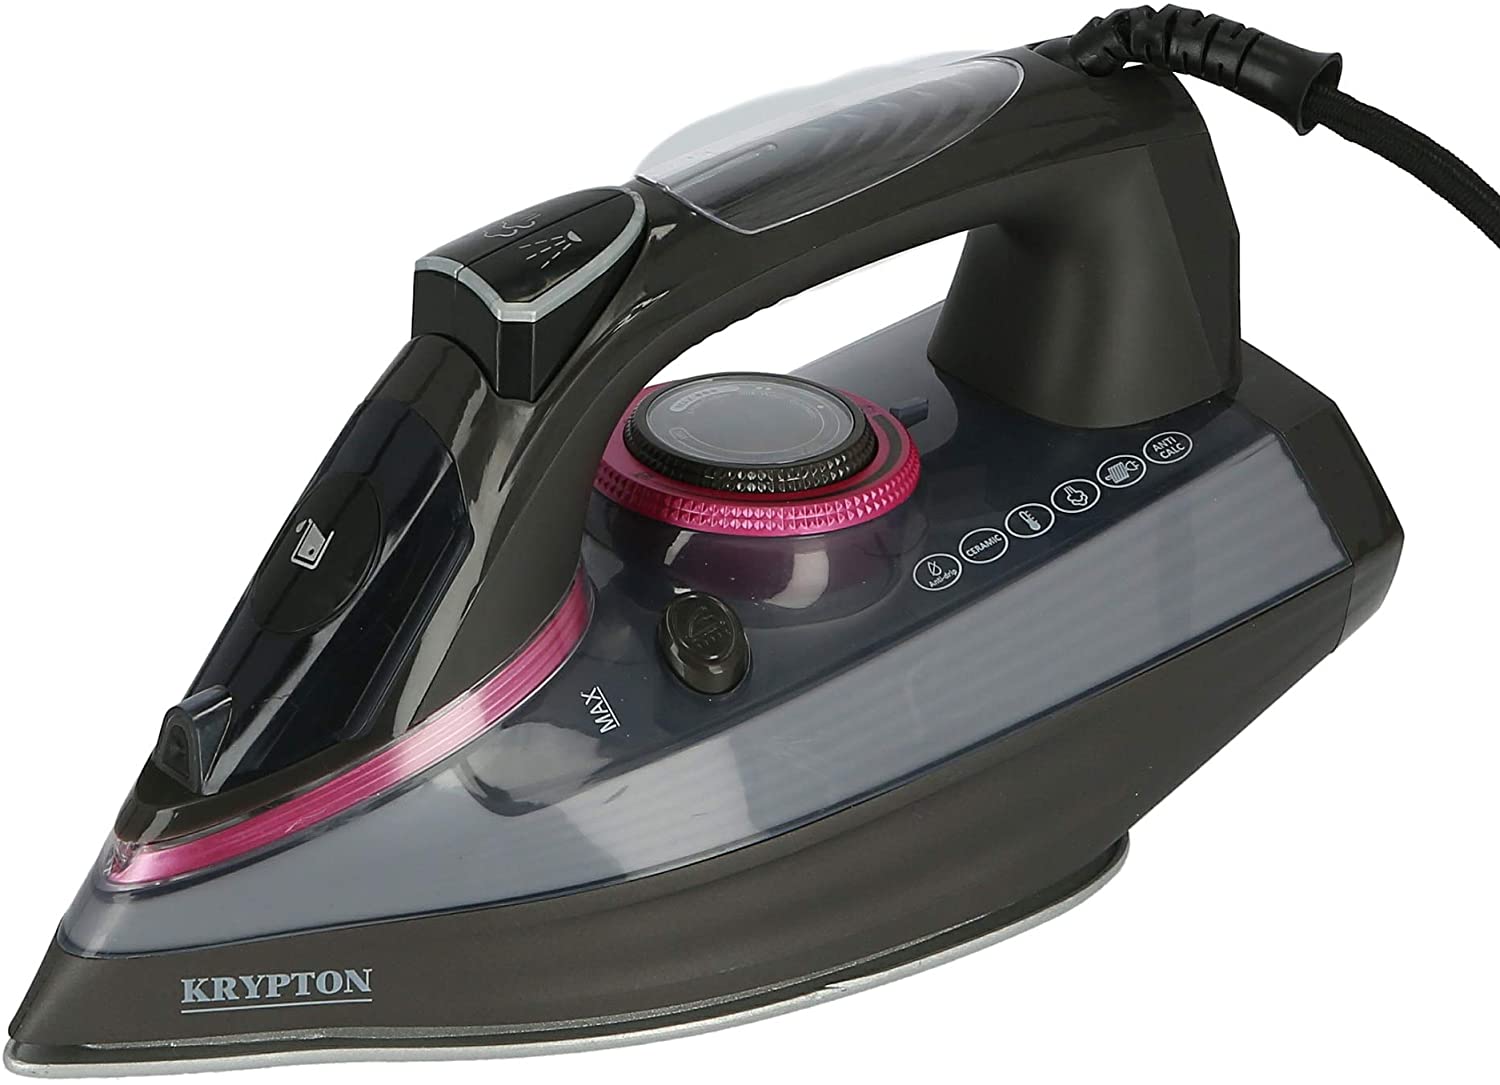 Krypton Steam Iron Black & White | reliable performance | lightweight | variable steam settings | safety features | stylish | even heat distribution | Halabh.com